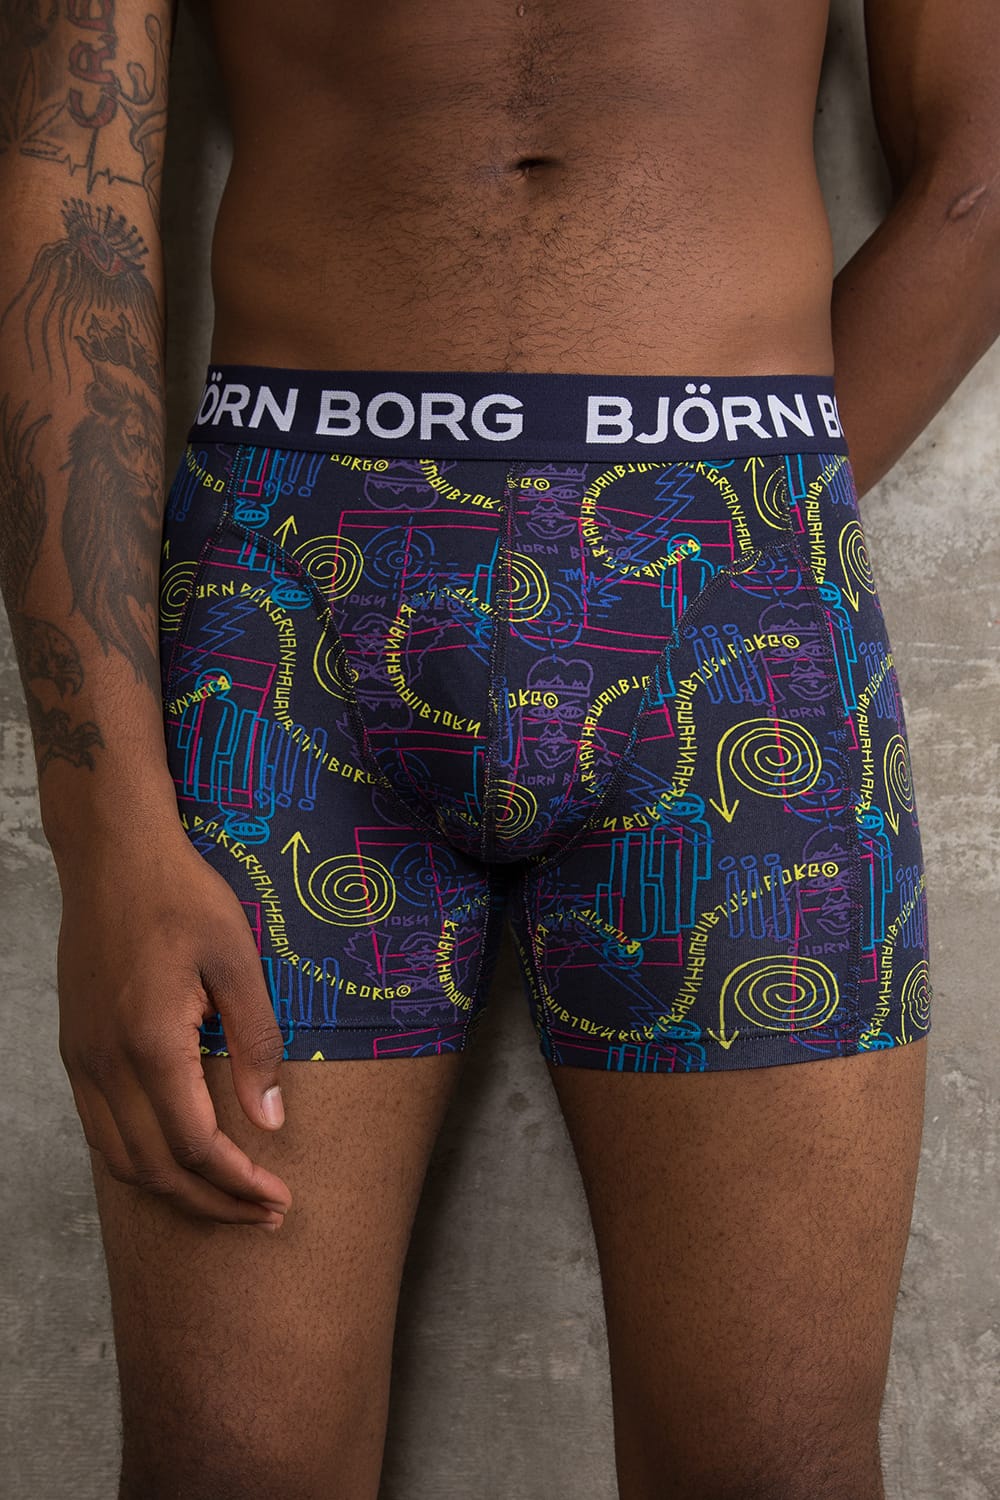 Bjorn Borg's new Performance Underwear collection is not what you think |  The Independent | The Independent